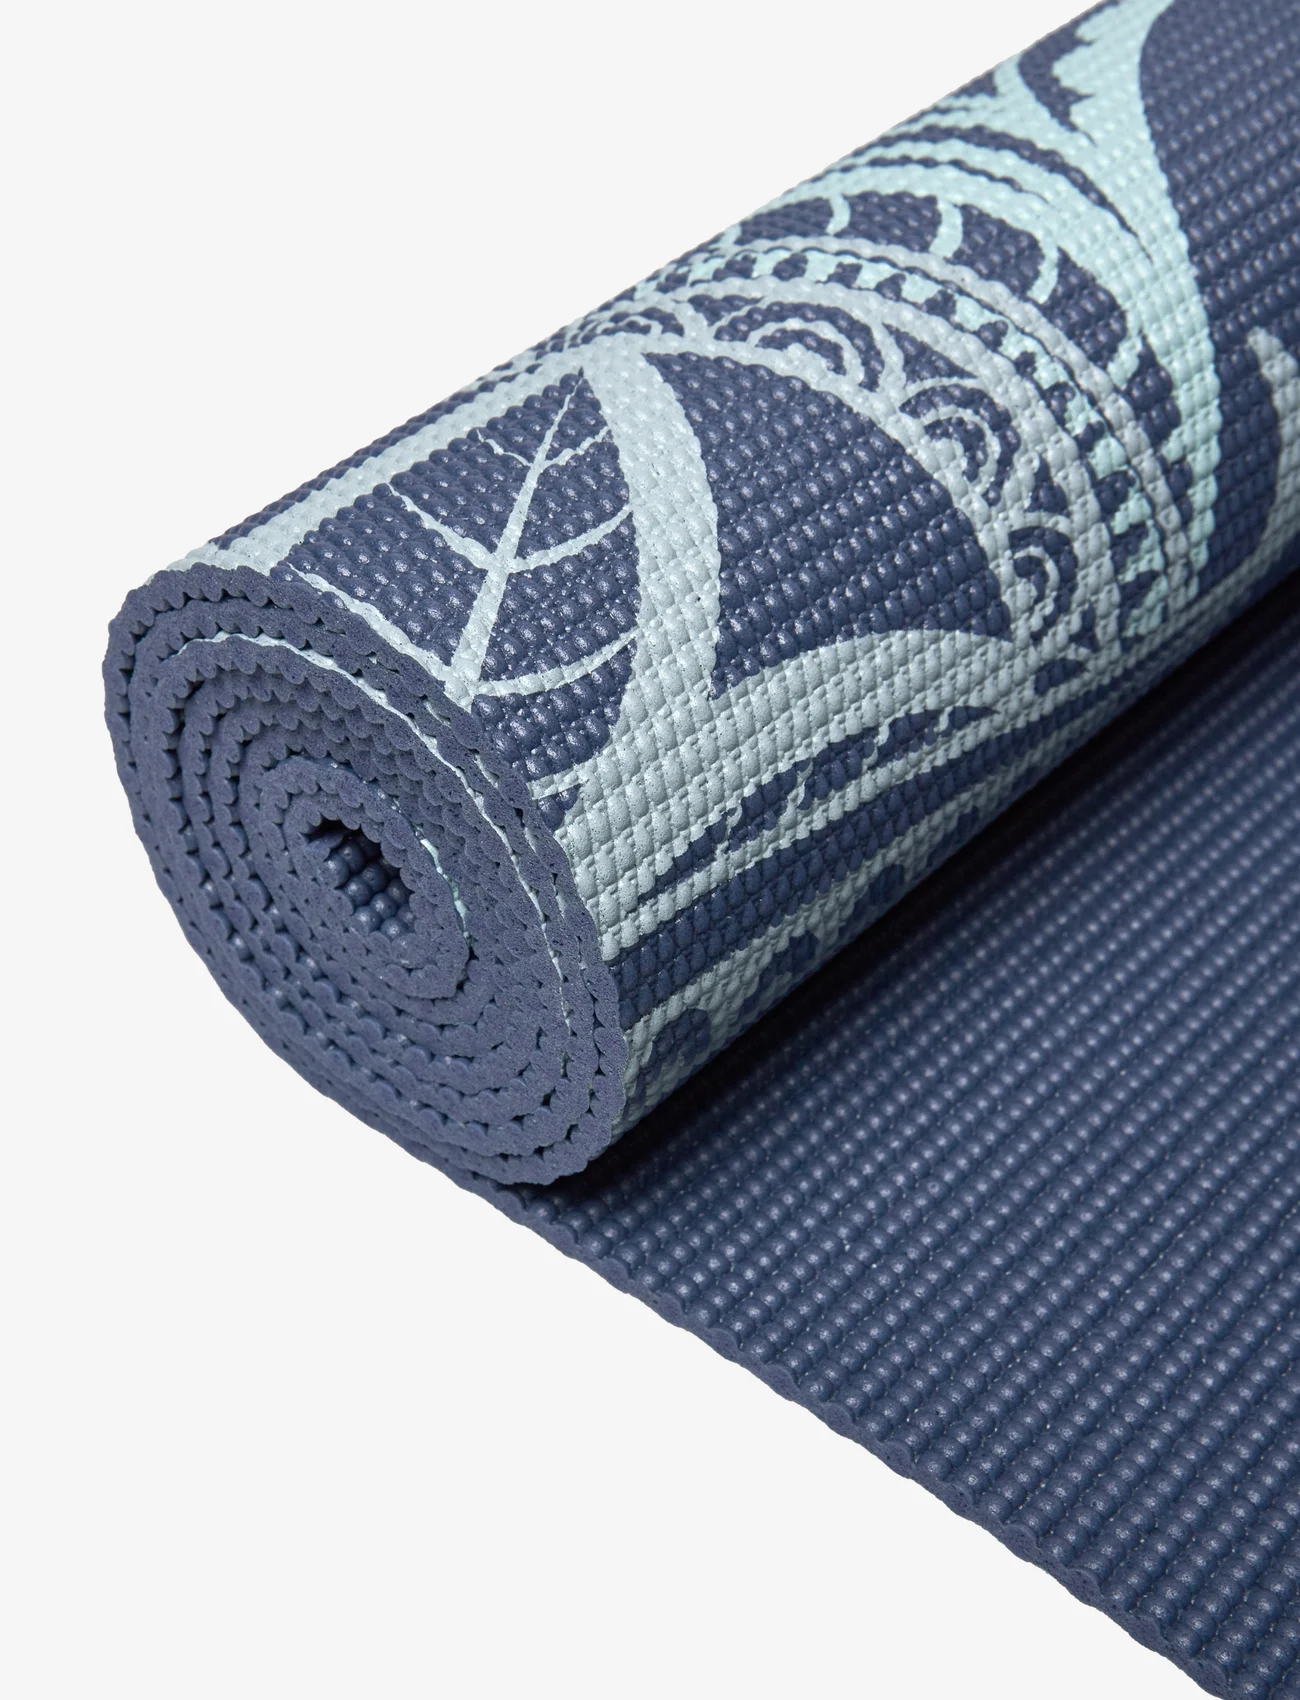 Gaiam - GAIAM HIGH TIDE POINT YOGA MAT 5MM CLASSIC PRINTED - lowest prices - blue - 1